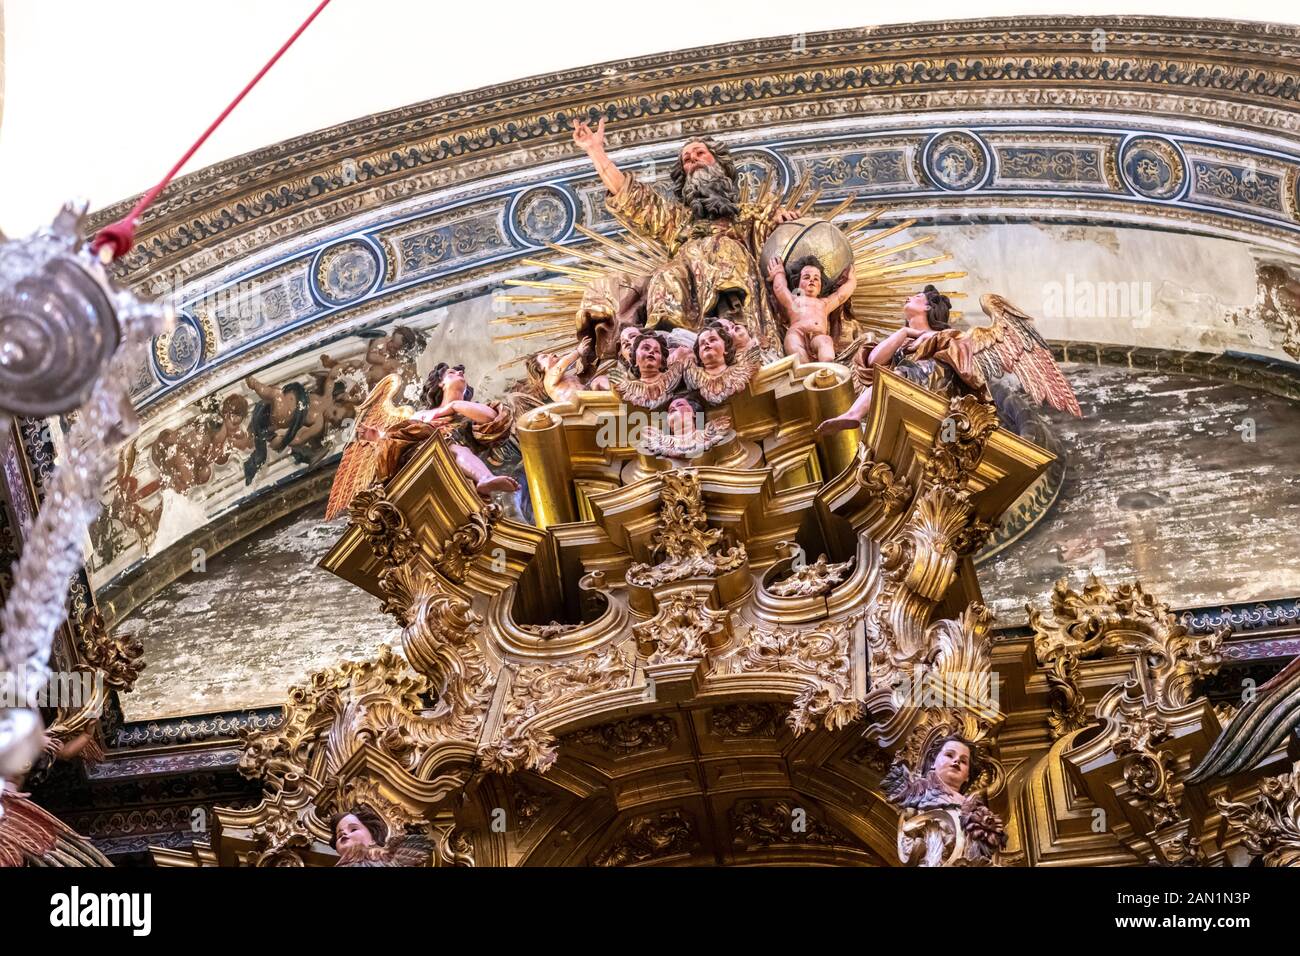 The top section of Cayetano de Acosta's monumental Sacramental Altarpiece in the Church of the Divine Saviour, Seville Stock Photo